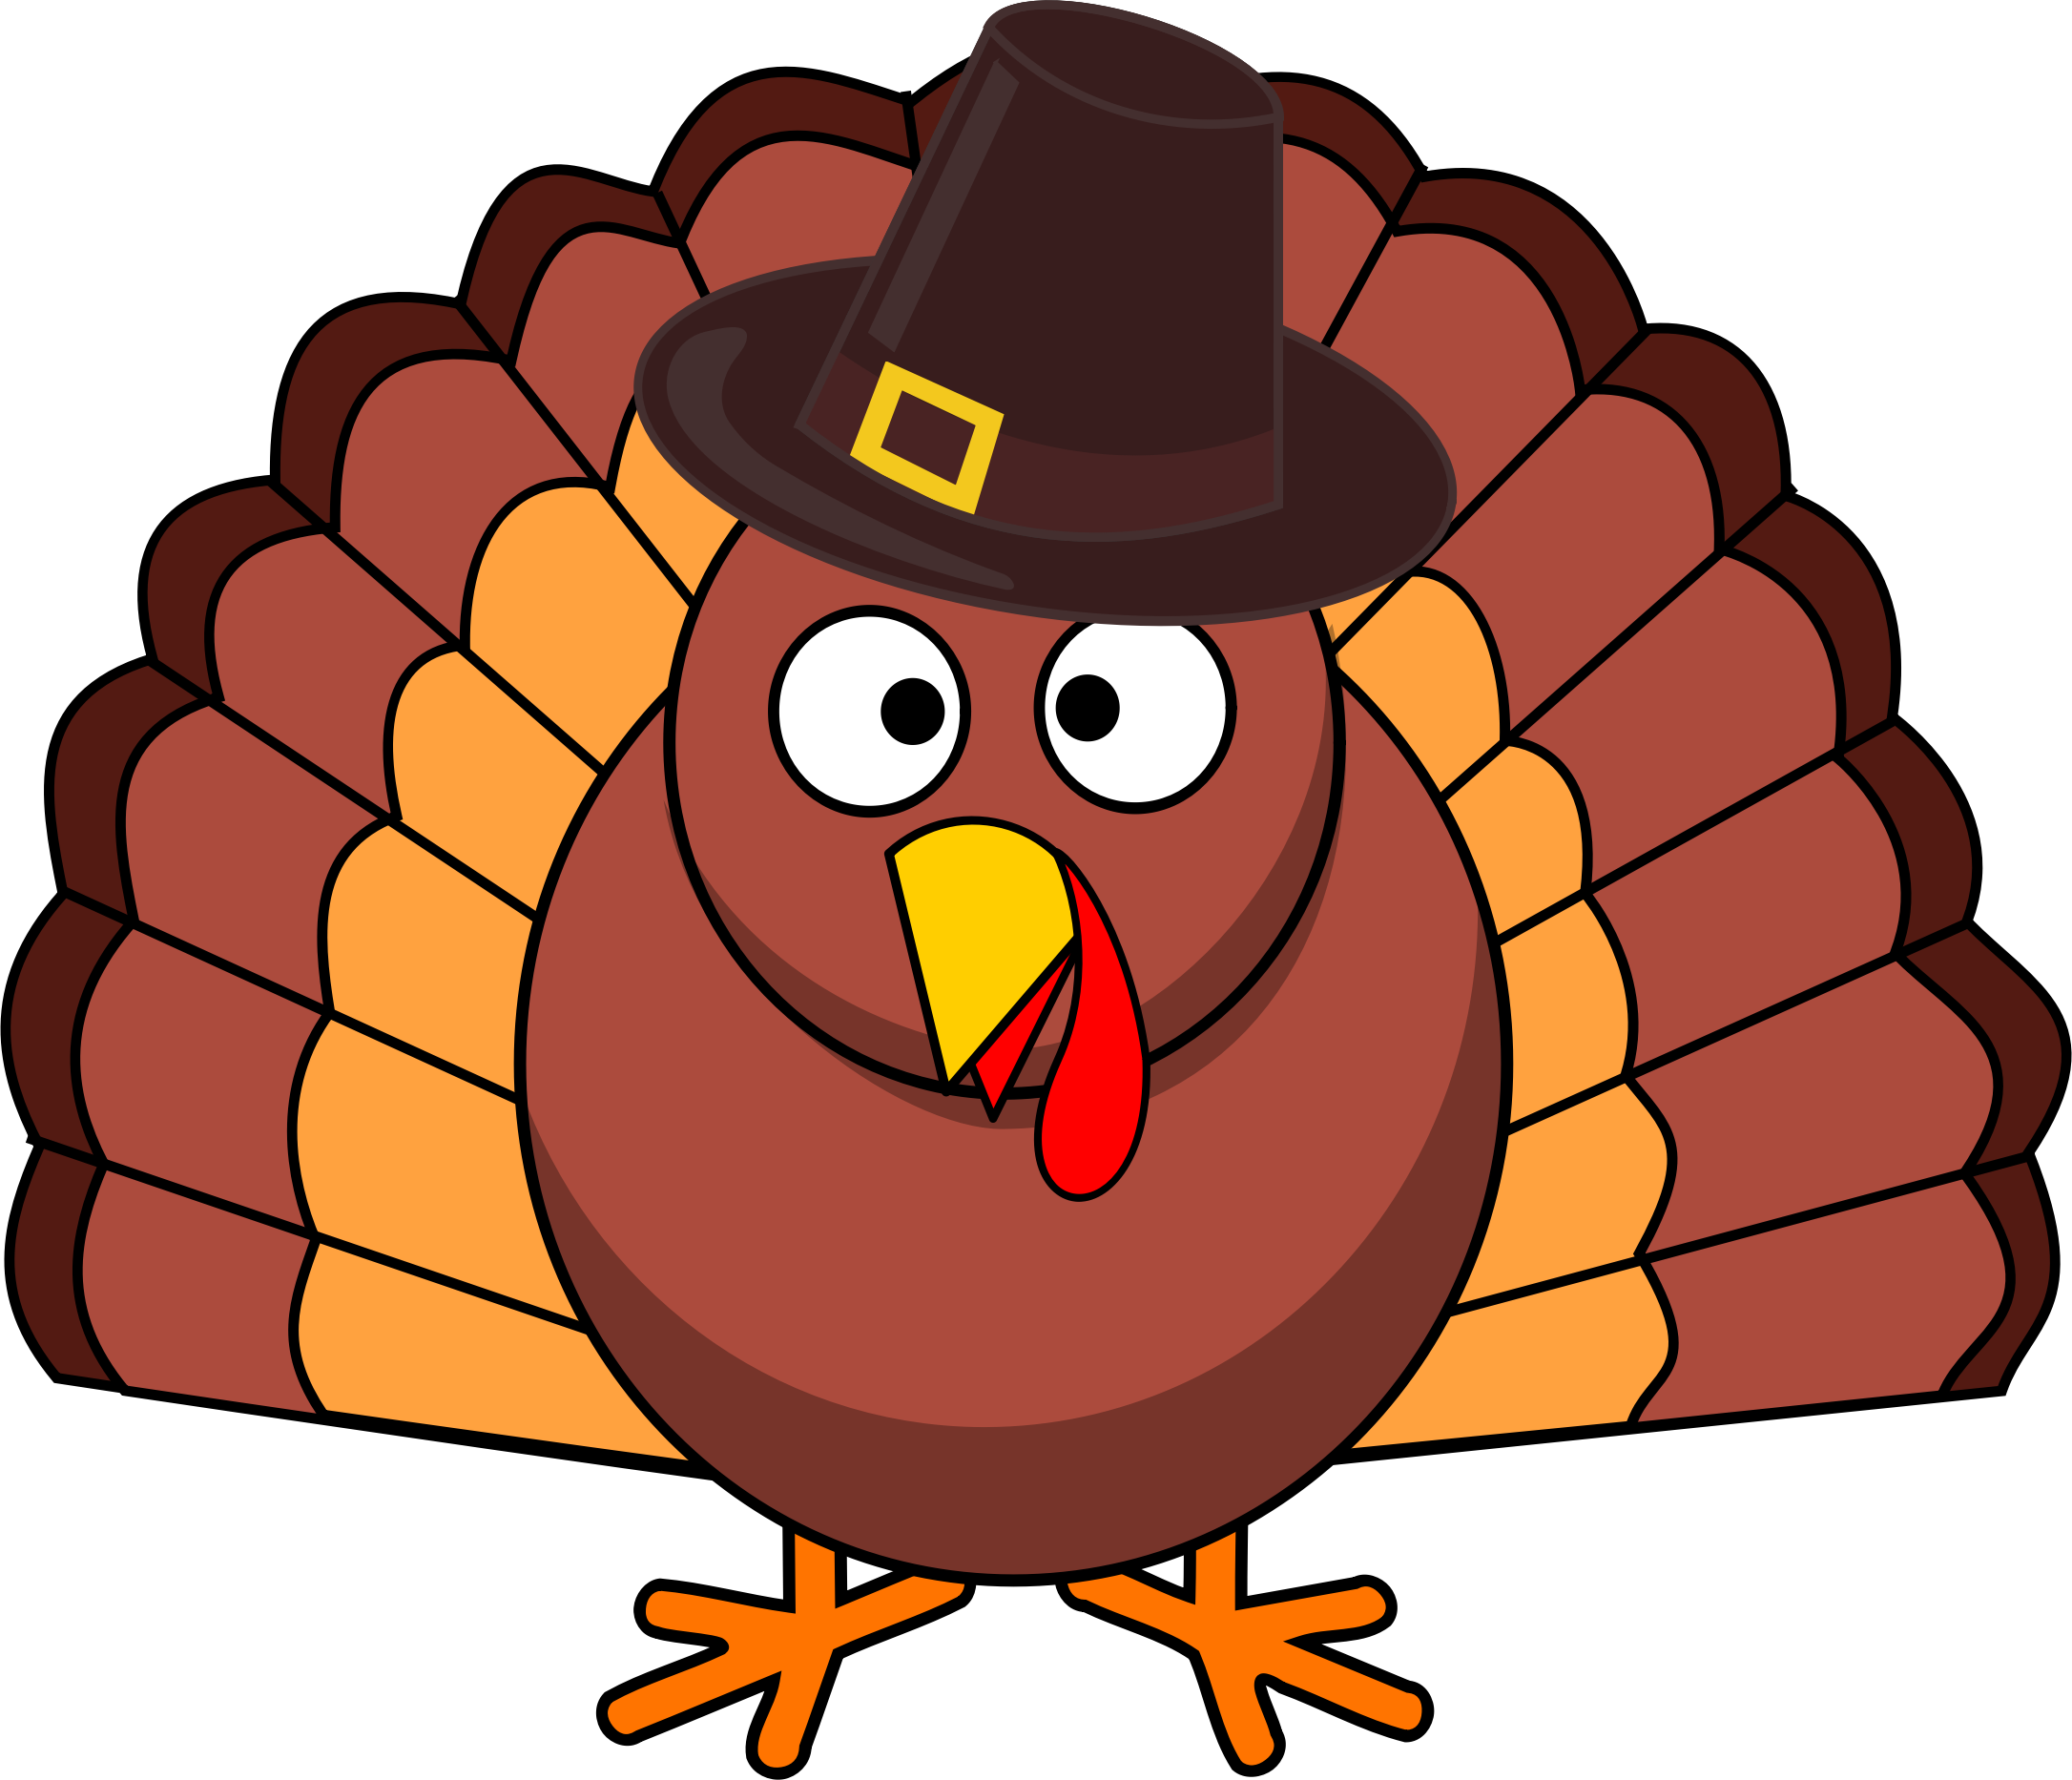 Download Turkey with Pilgrim Hat vector file image - Free stock ...